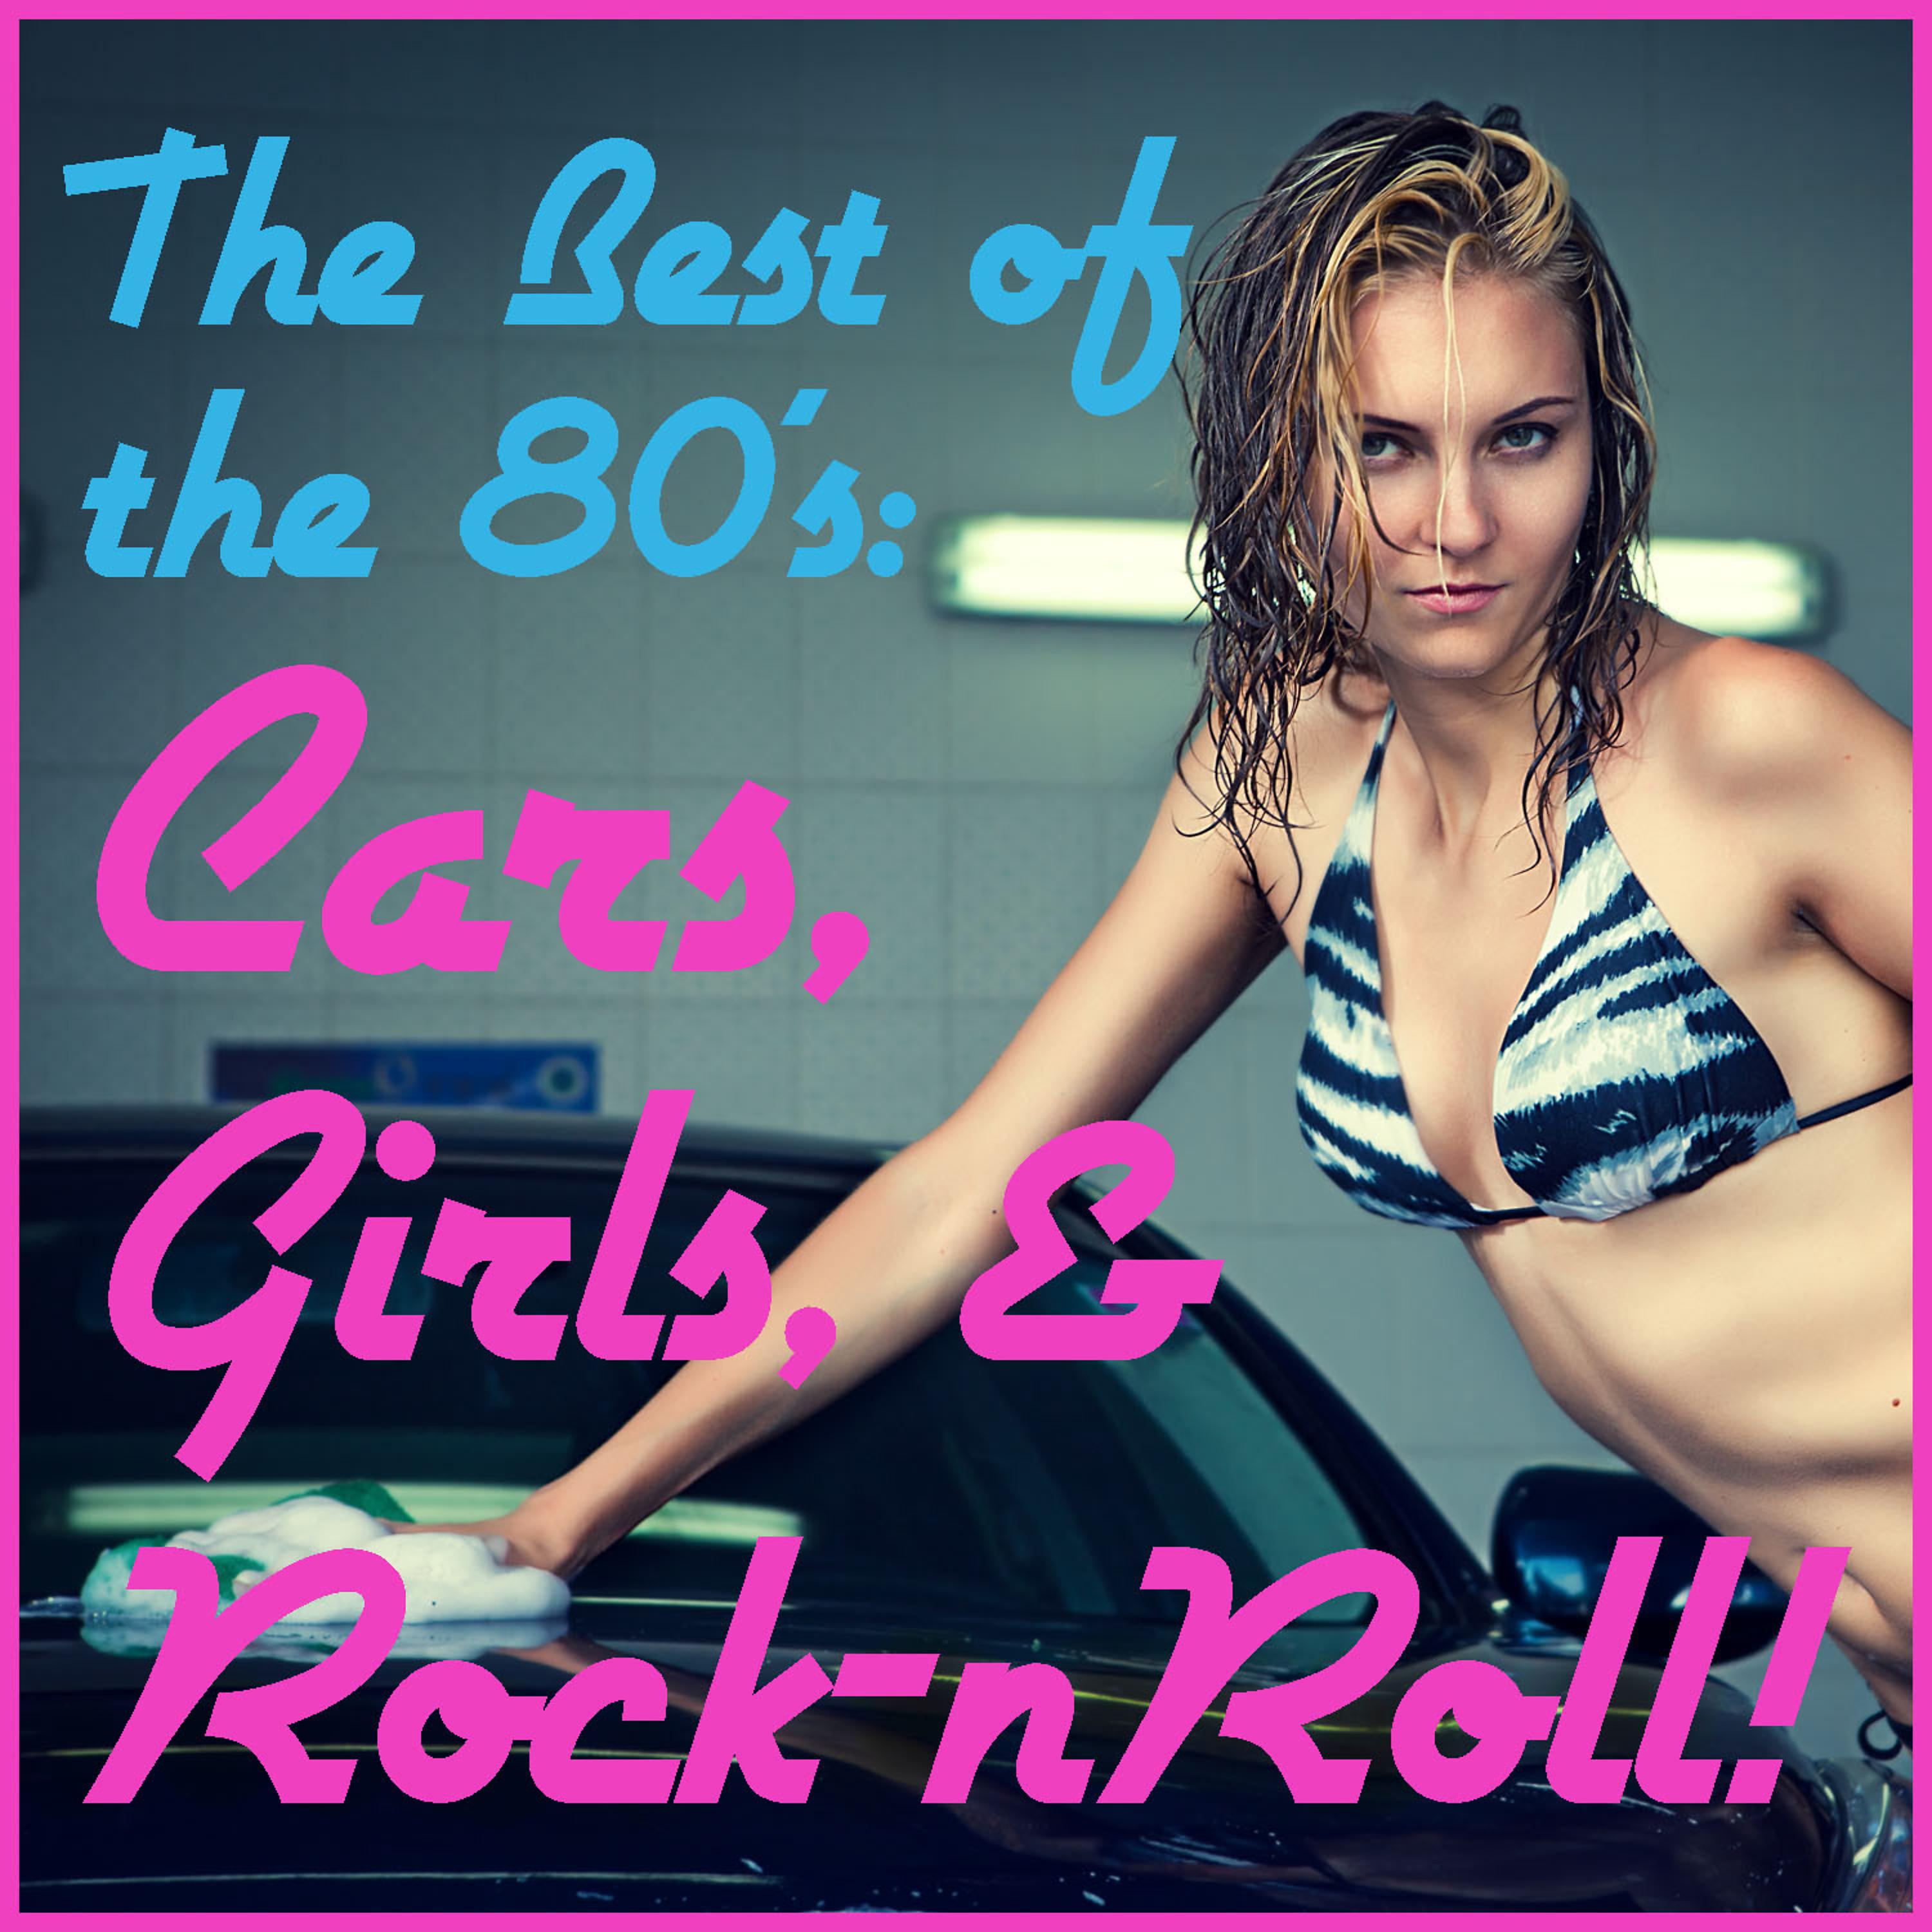 Постер альбома The Best of the 80's: Cars, Girls, And Rock-n-Roll! Featuring Songs Like Don't Stop Believin', Cherry Pie, Eye of the Tiger, We Built This City, Round & Round, More!